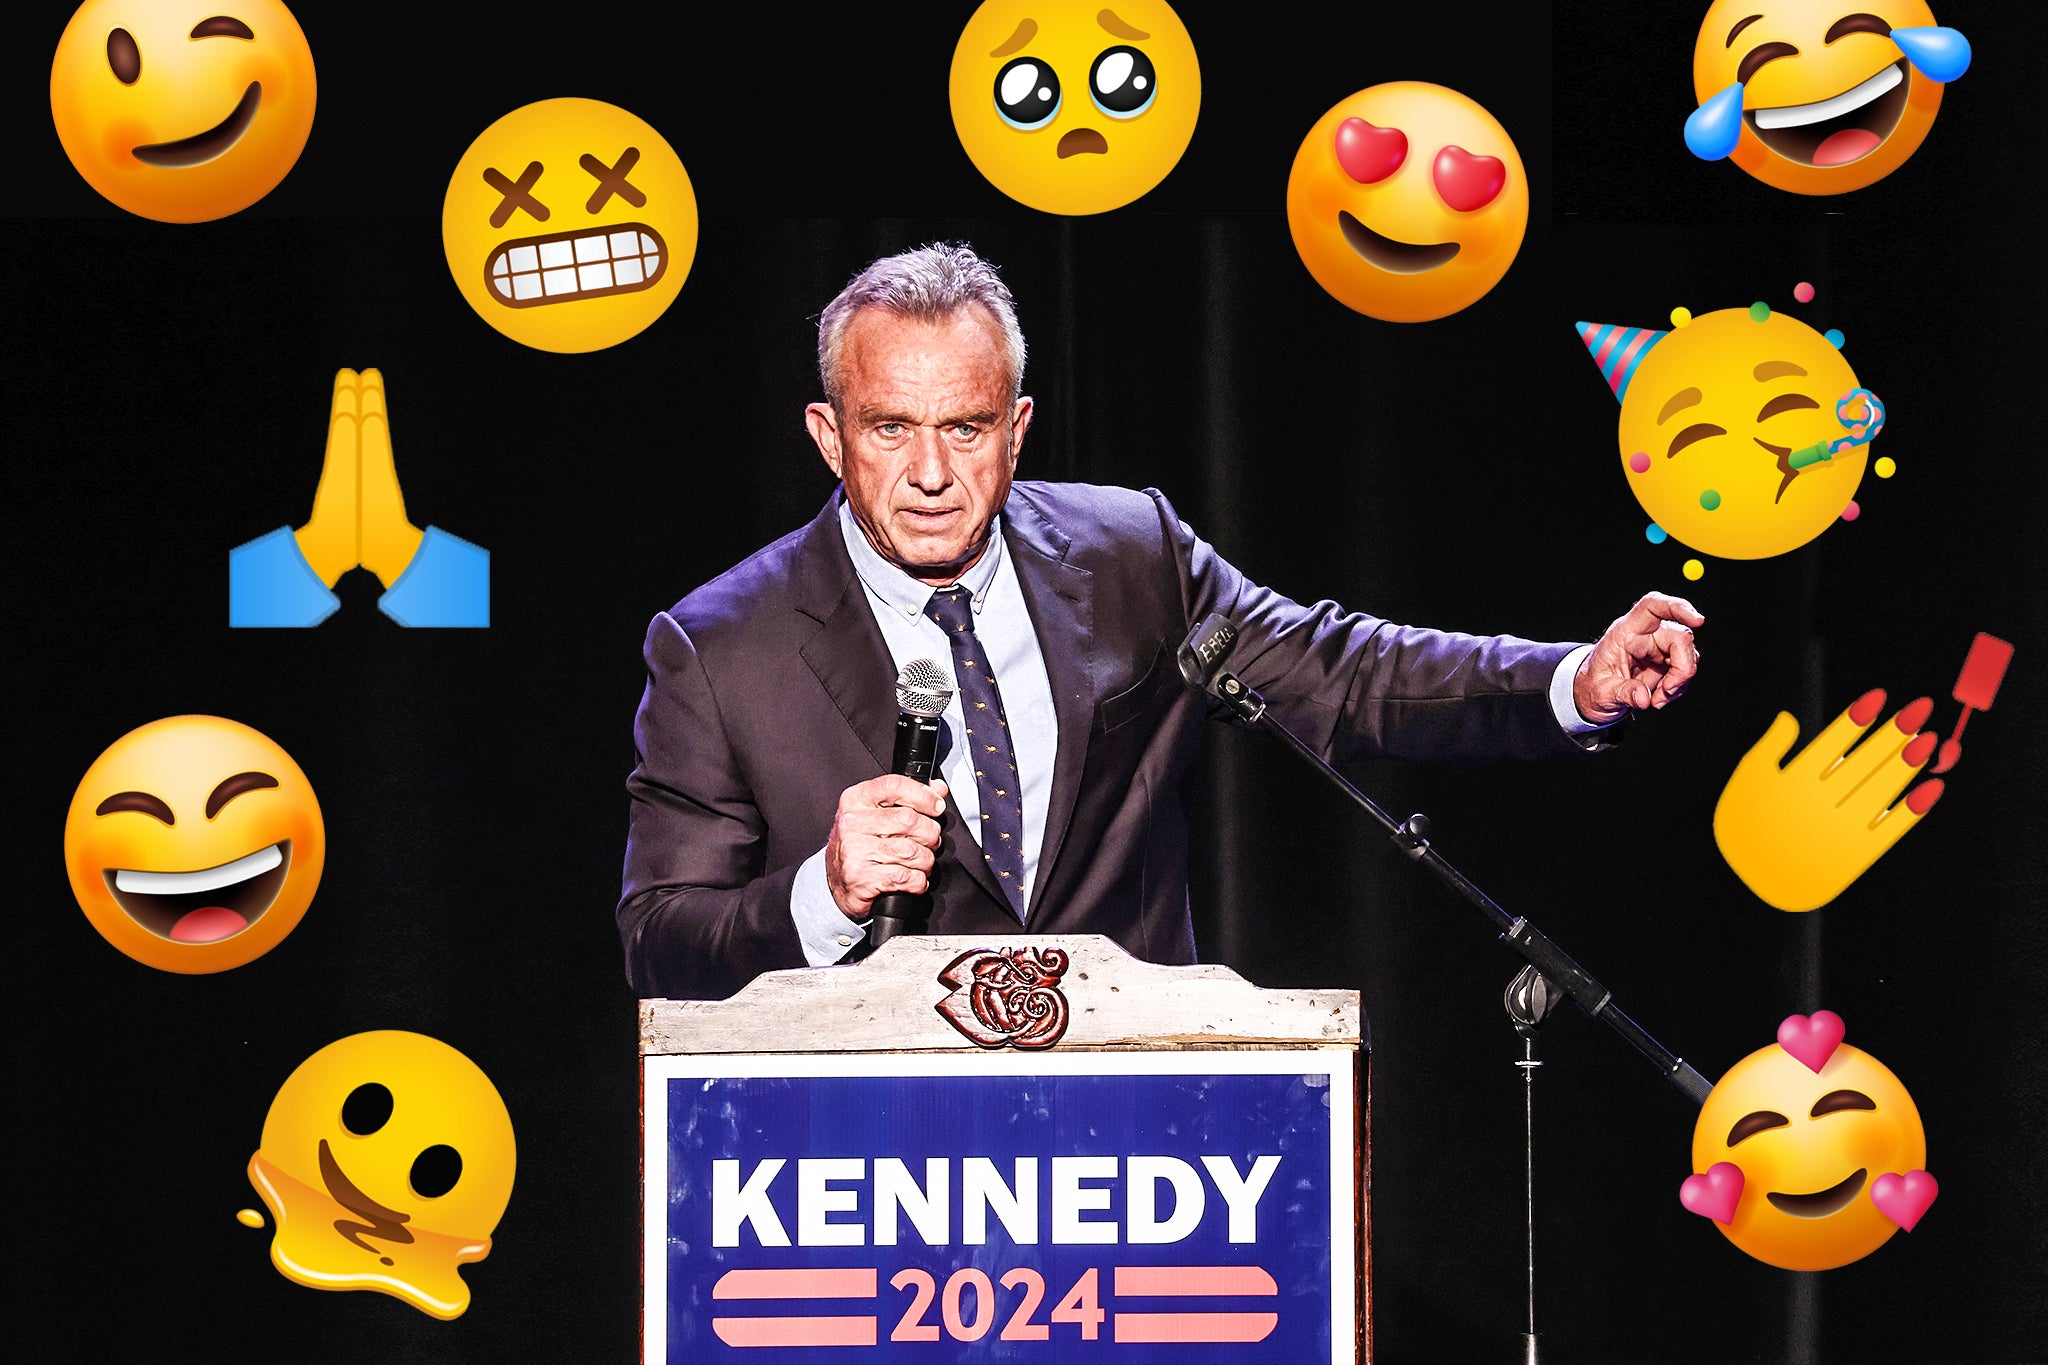 Gen Z has had enough of politics. Does RFK Jr have the answer? The